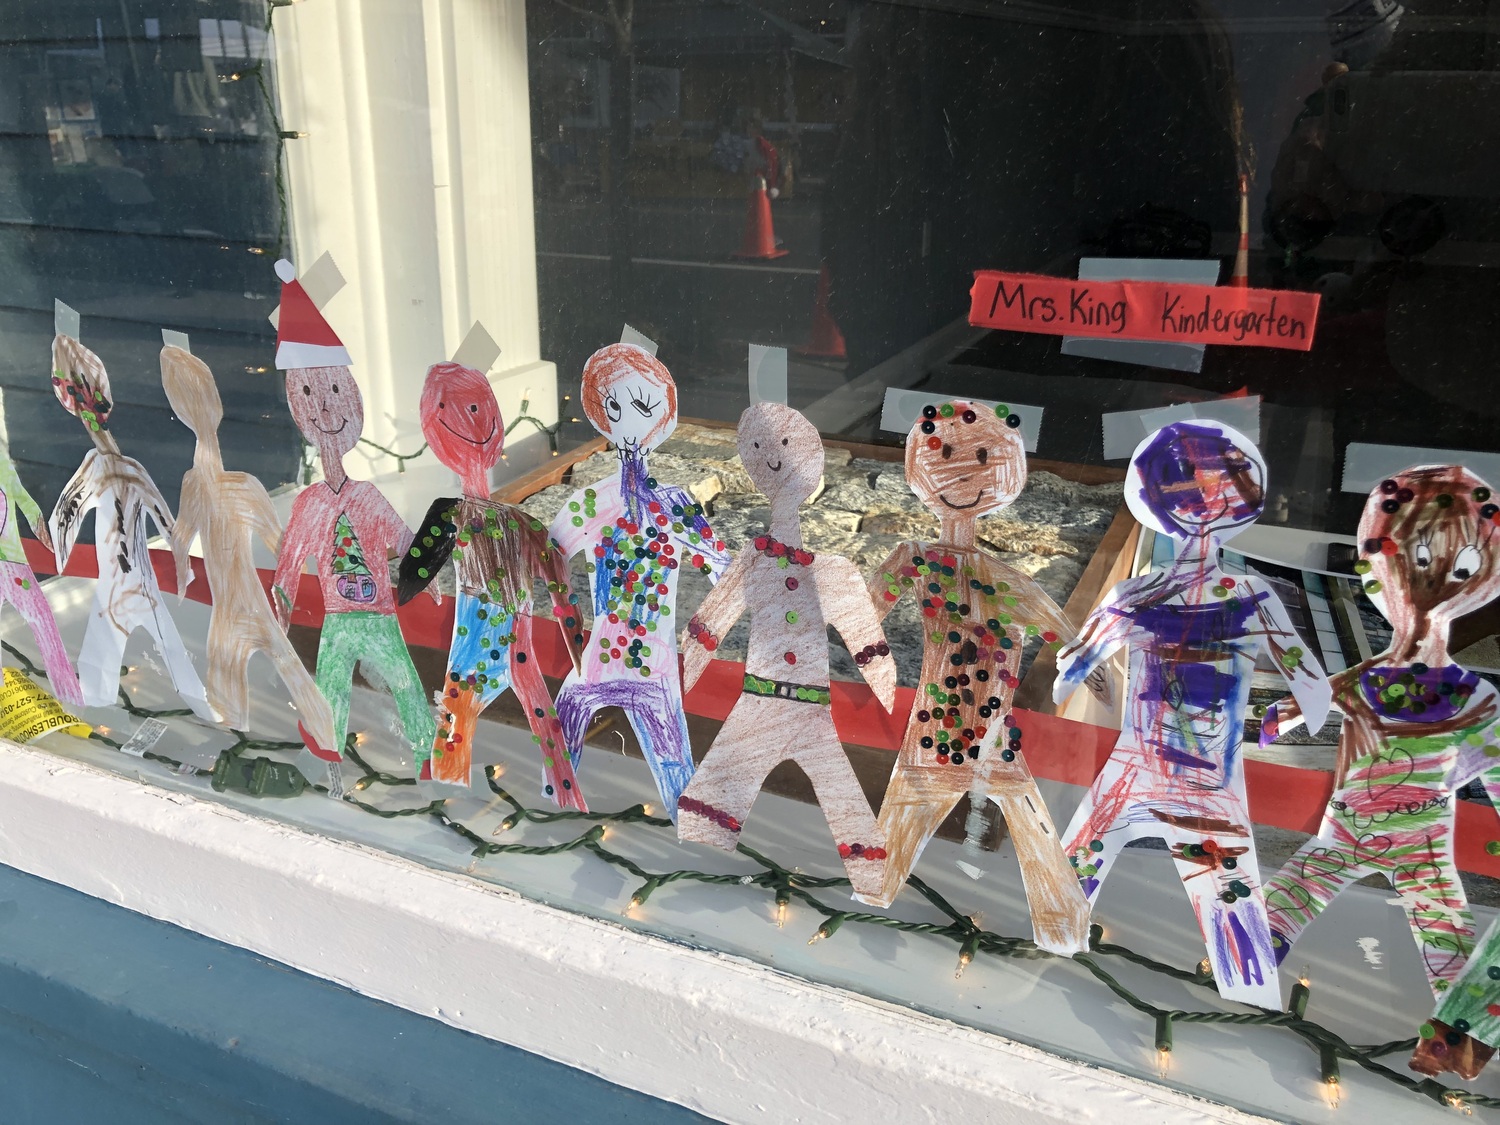 East Quogue School artwork decorated the windows of local businesses during last year's 